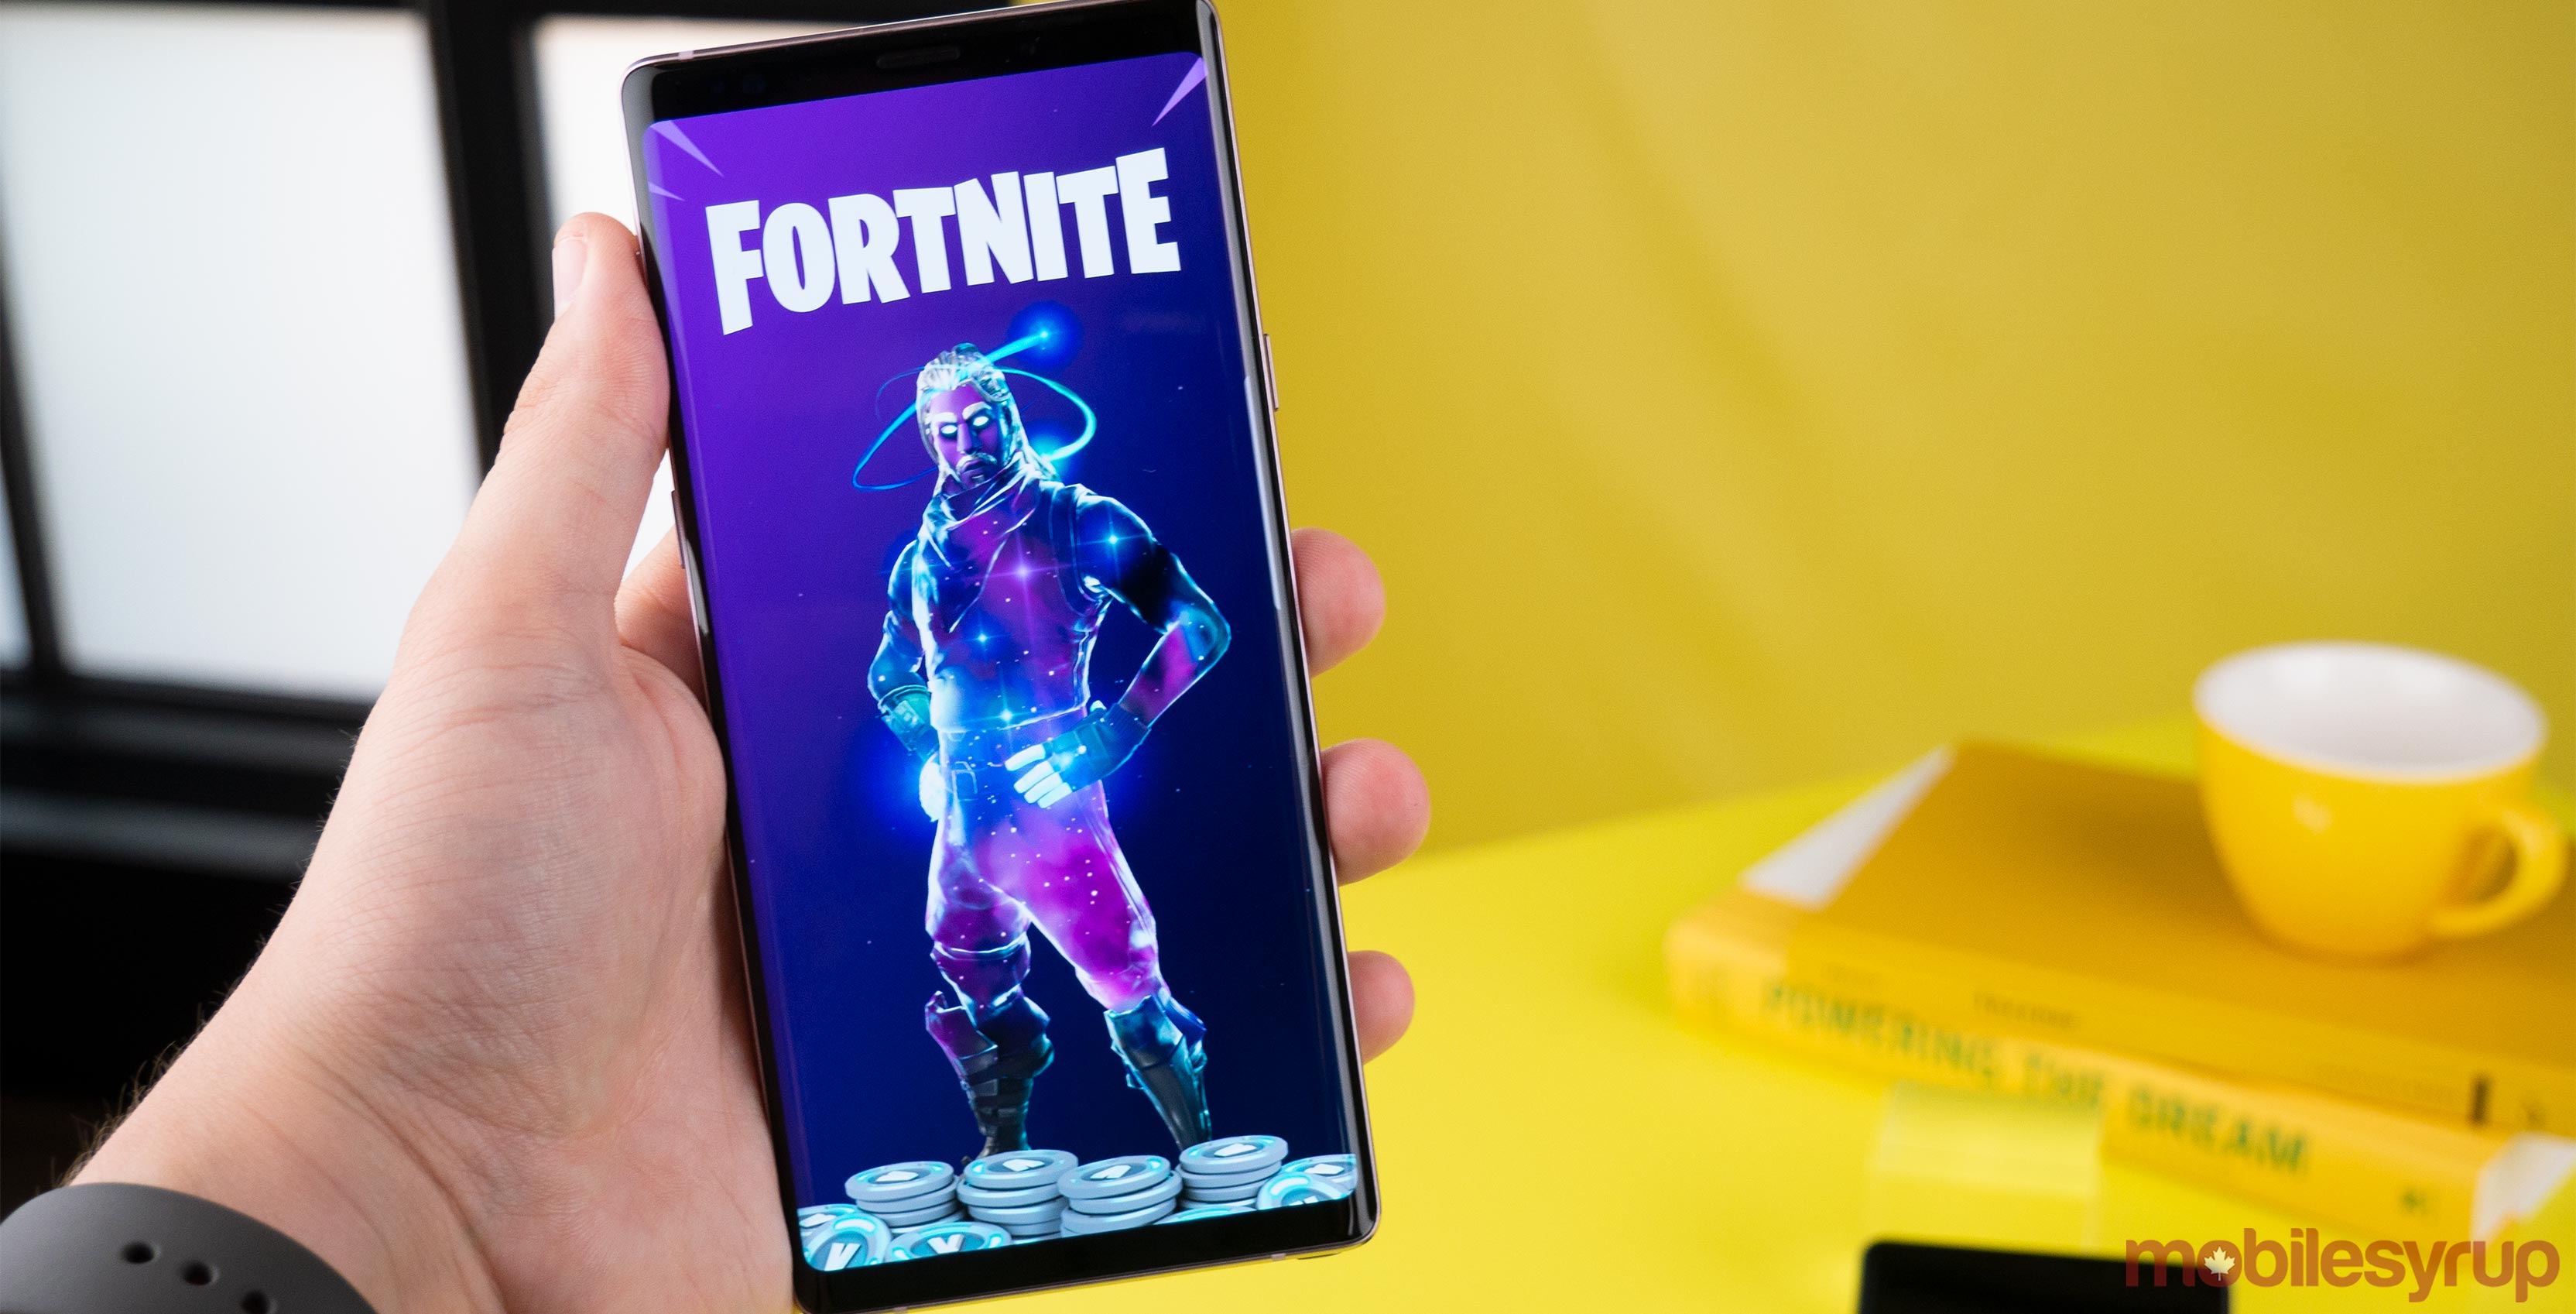 fortnite on android - fortnite beta release date android